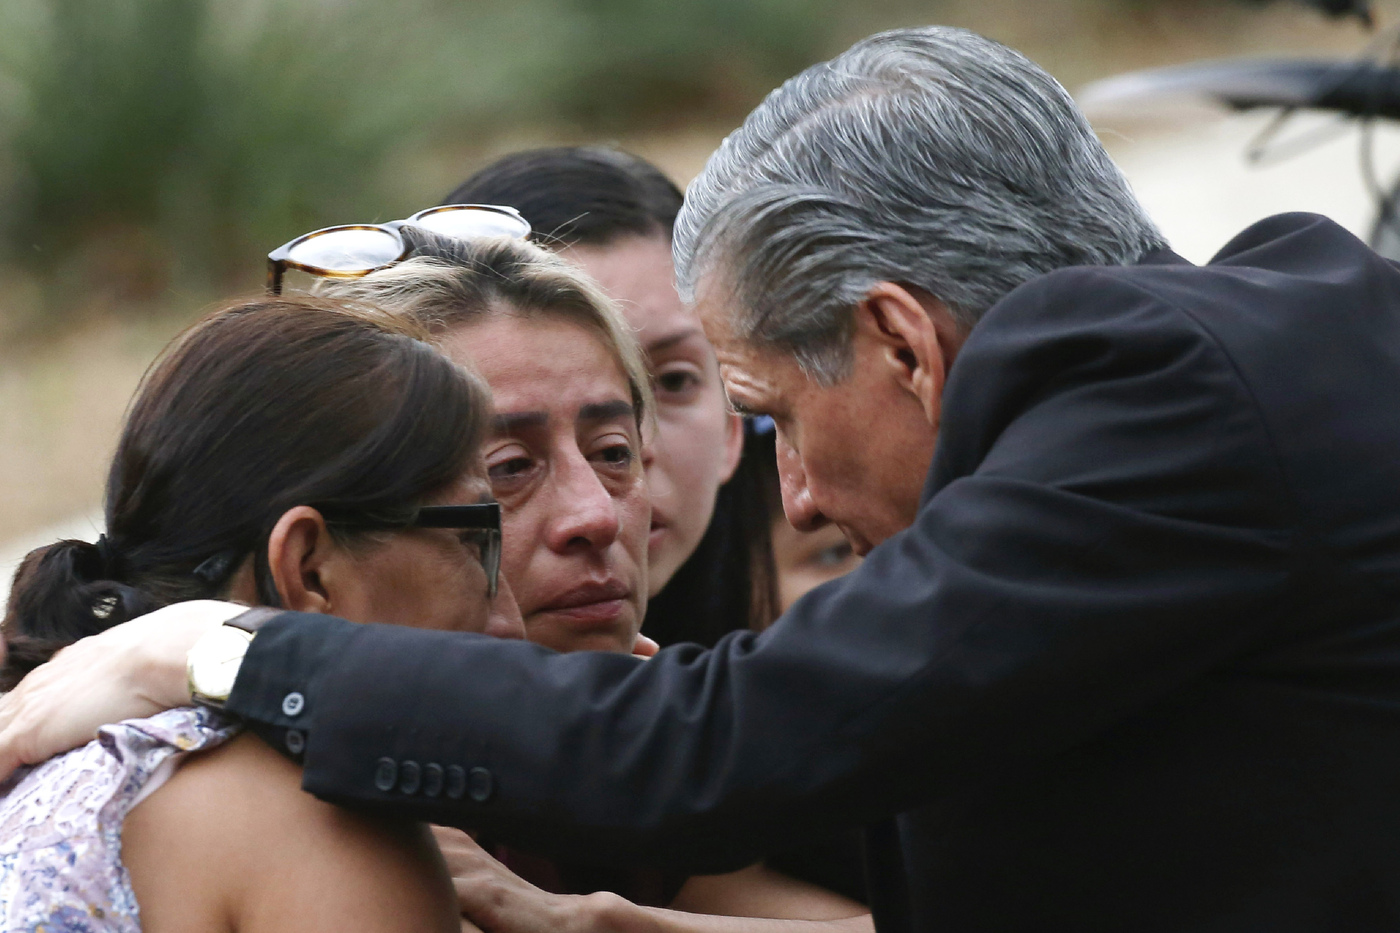 CORRECTS SPELLING TO GARCIA-SILLER, INSTEAD OF GARCIA SELLER - The archbishop of San Antonio, Gustavo Garcia-Siller, comforts families outside the Civic Center following a deadly school shooting at Robb Elementary School in Uvalde, Texas, Tuesday, May 24, 2022. (AP Photo/Dario Lopez-Mills)